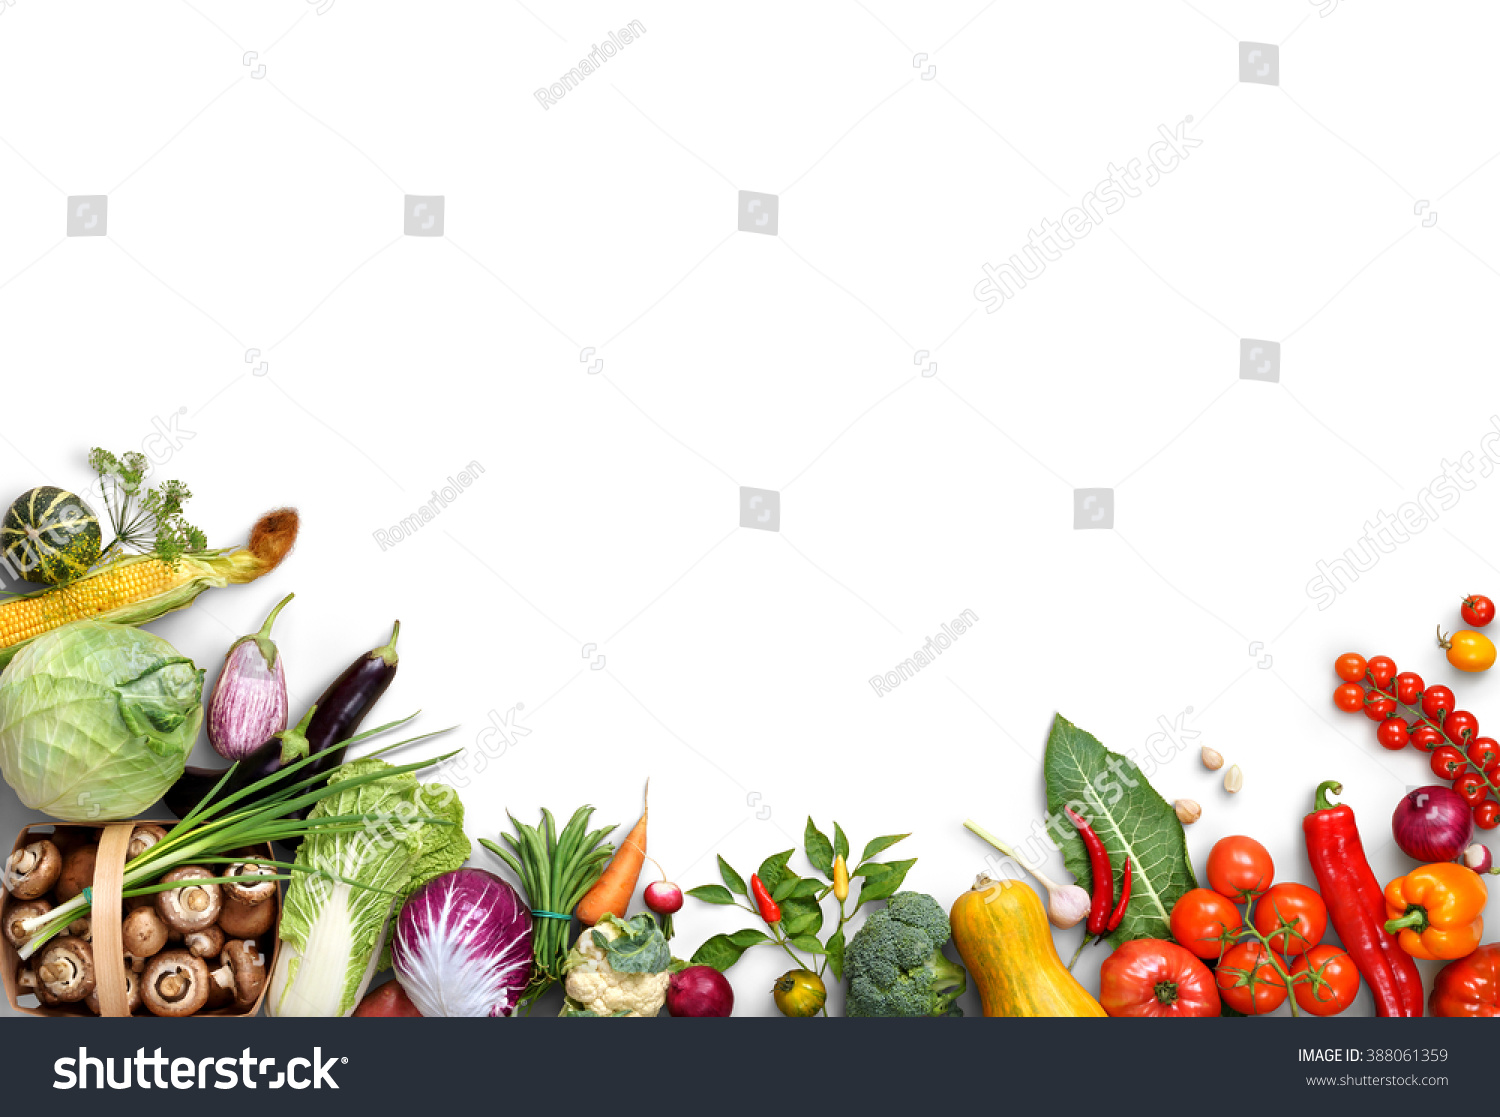 Healthy eating background. Food photography different fruits and vegetables isolated white background. Copy space. High resolution product #388061359